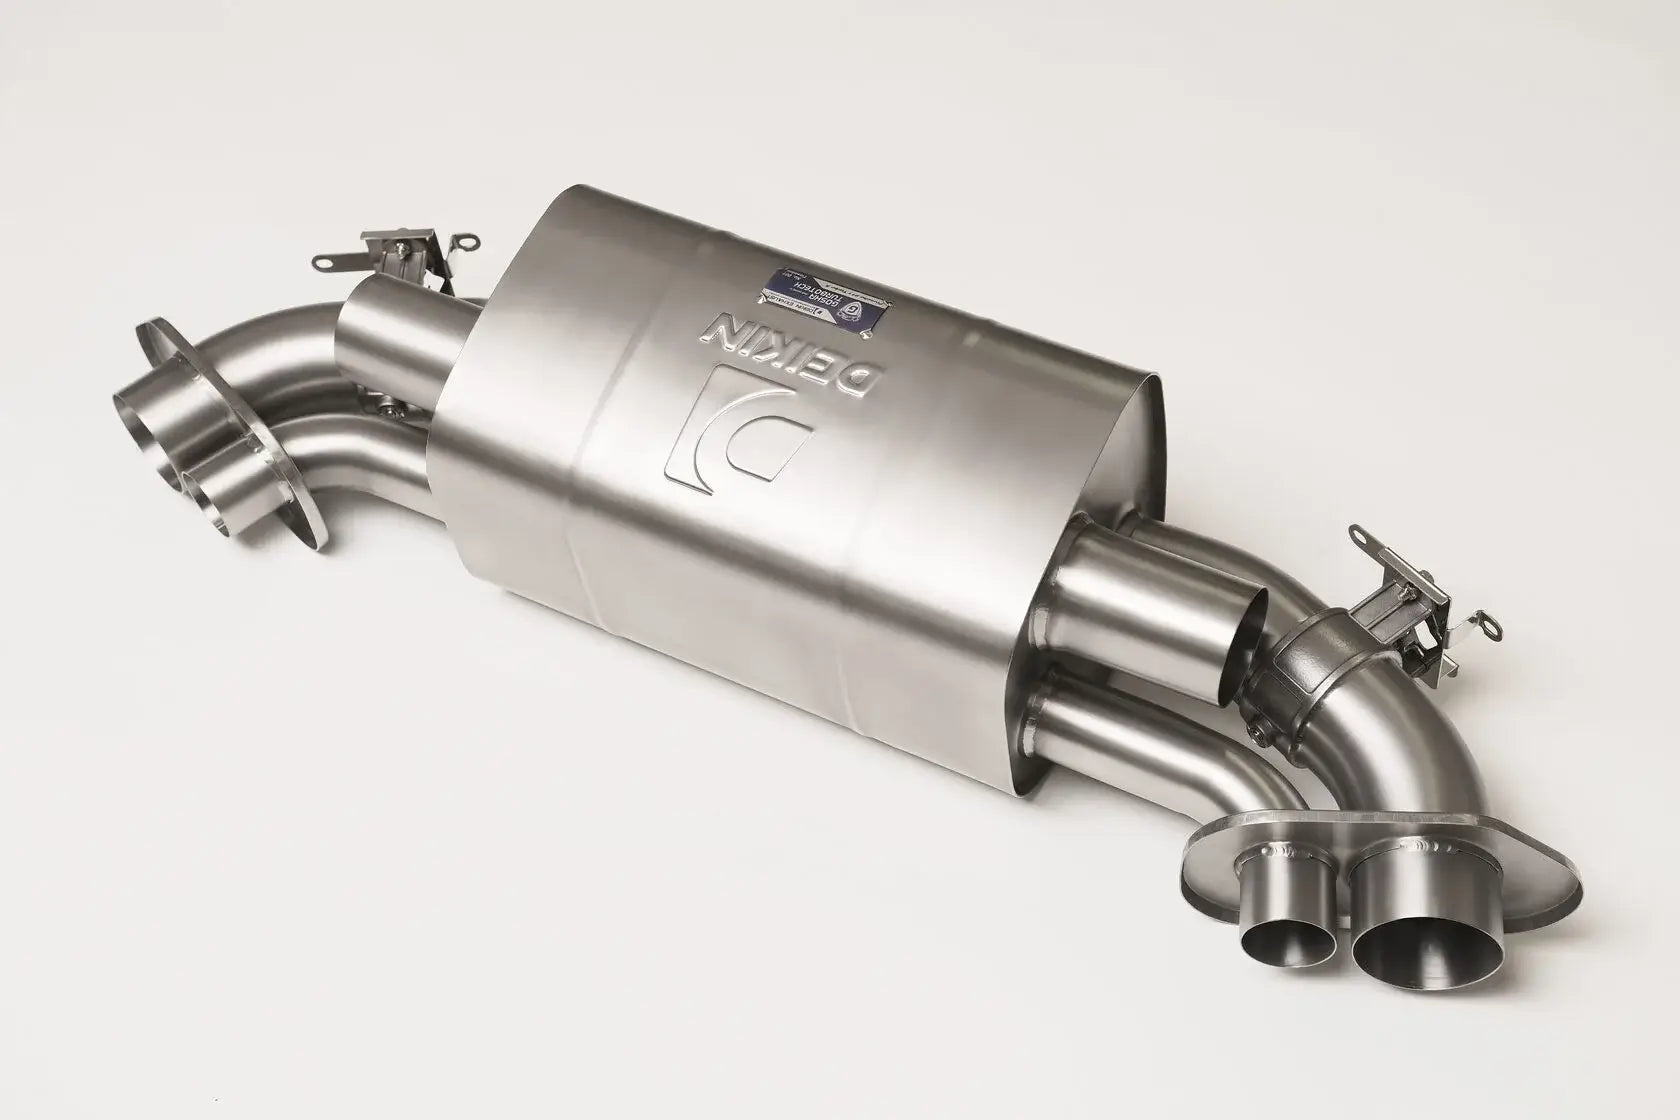 DEIKIN 10-PO.911.С4/СS/C4S/T4S.992.S-ES-Ti-00 Exhaust system "Street" Titan for Porsche 911 Carrera 4/S/4S/Targa 4S (992) complete with downpipes without HeatShield Photo-0 